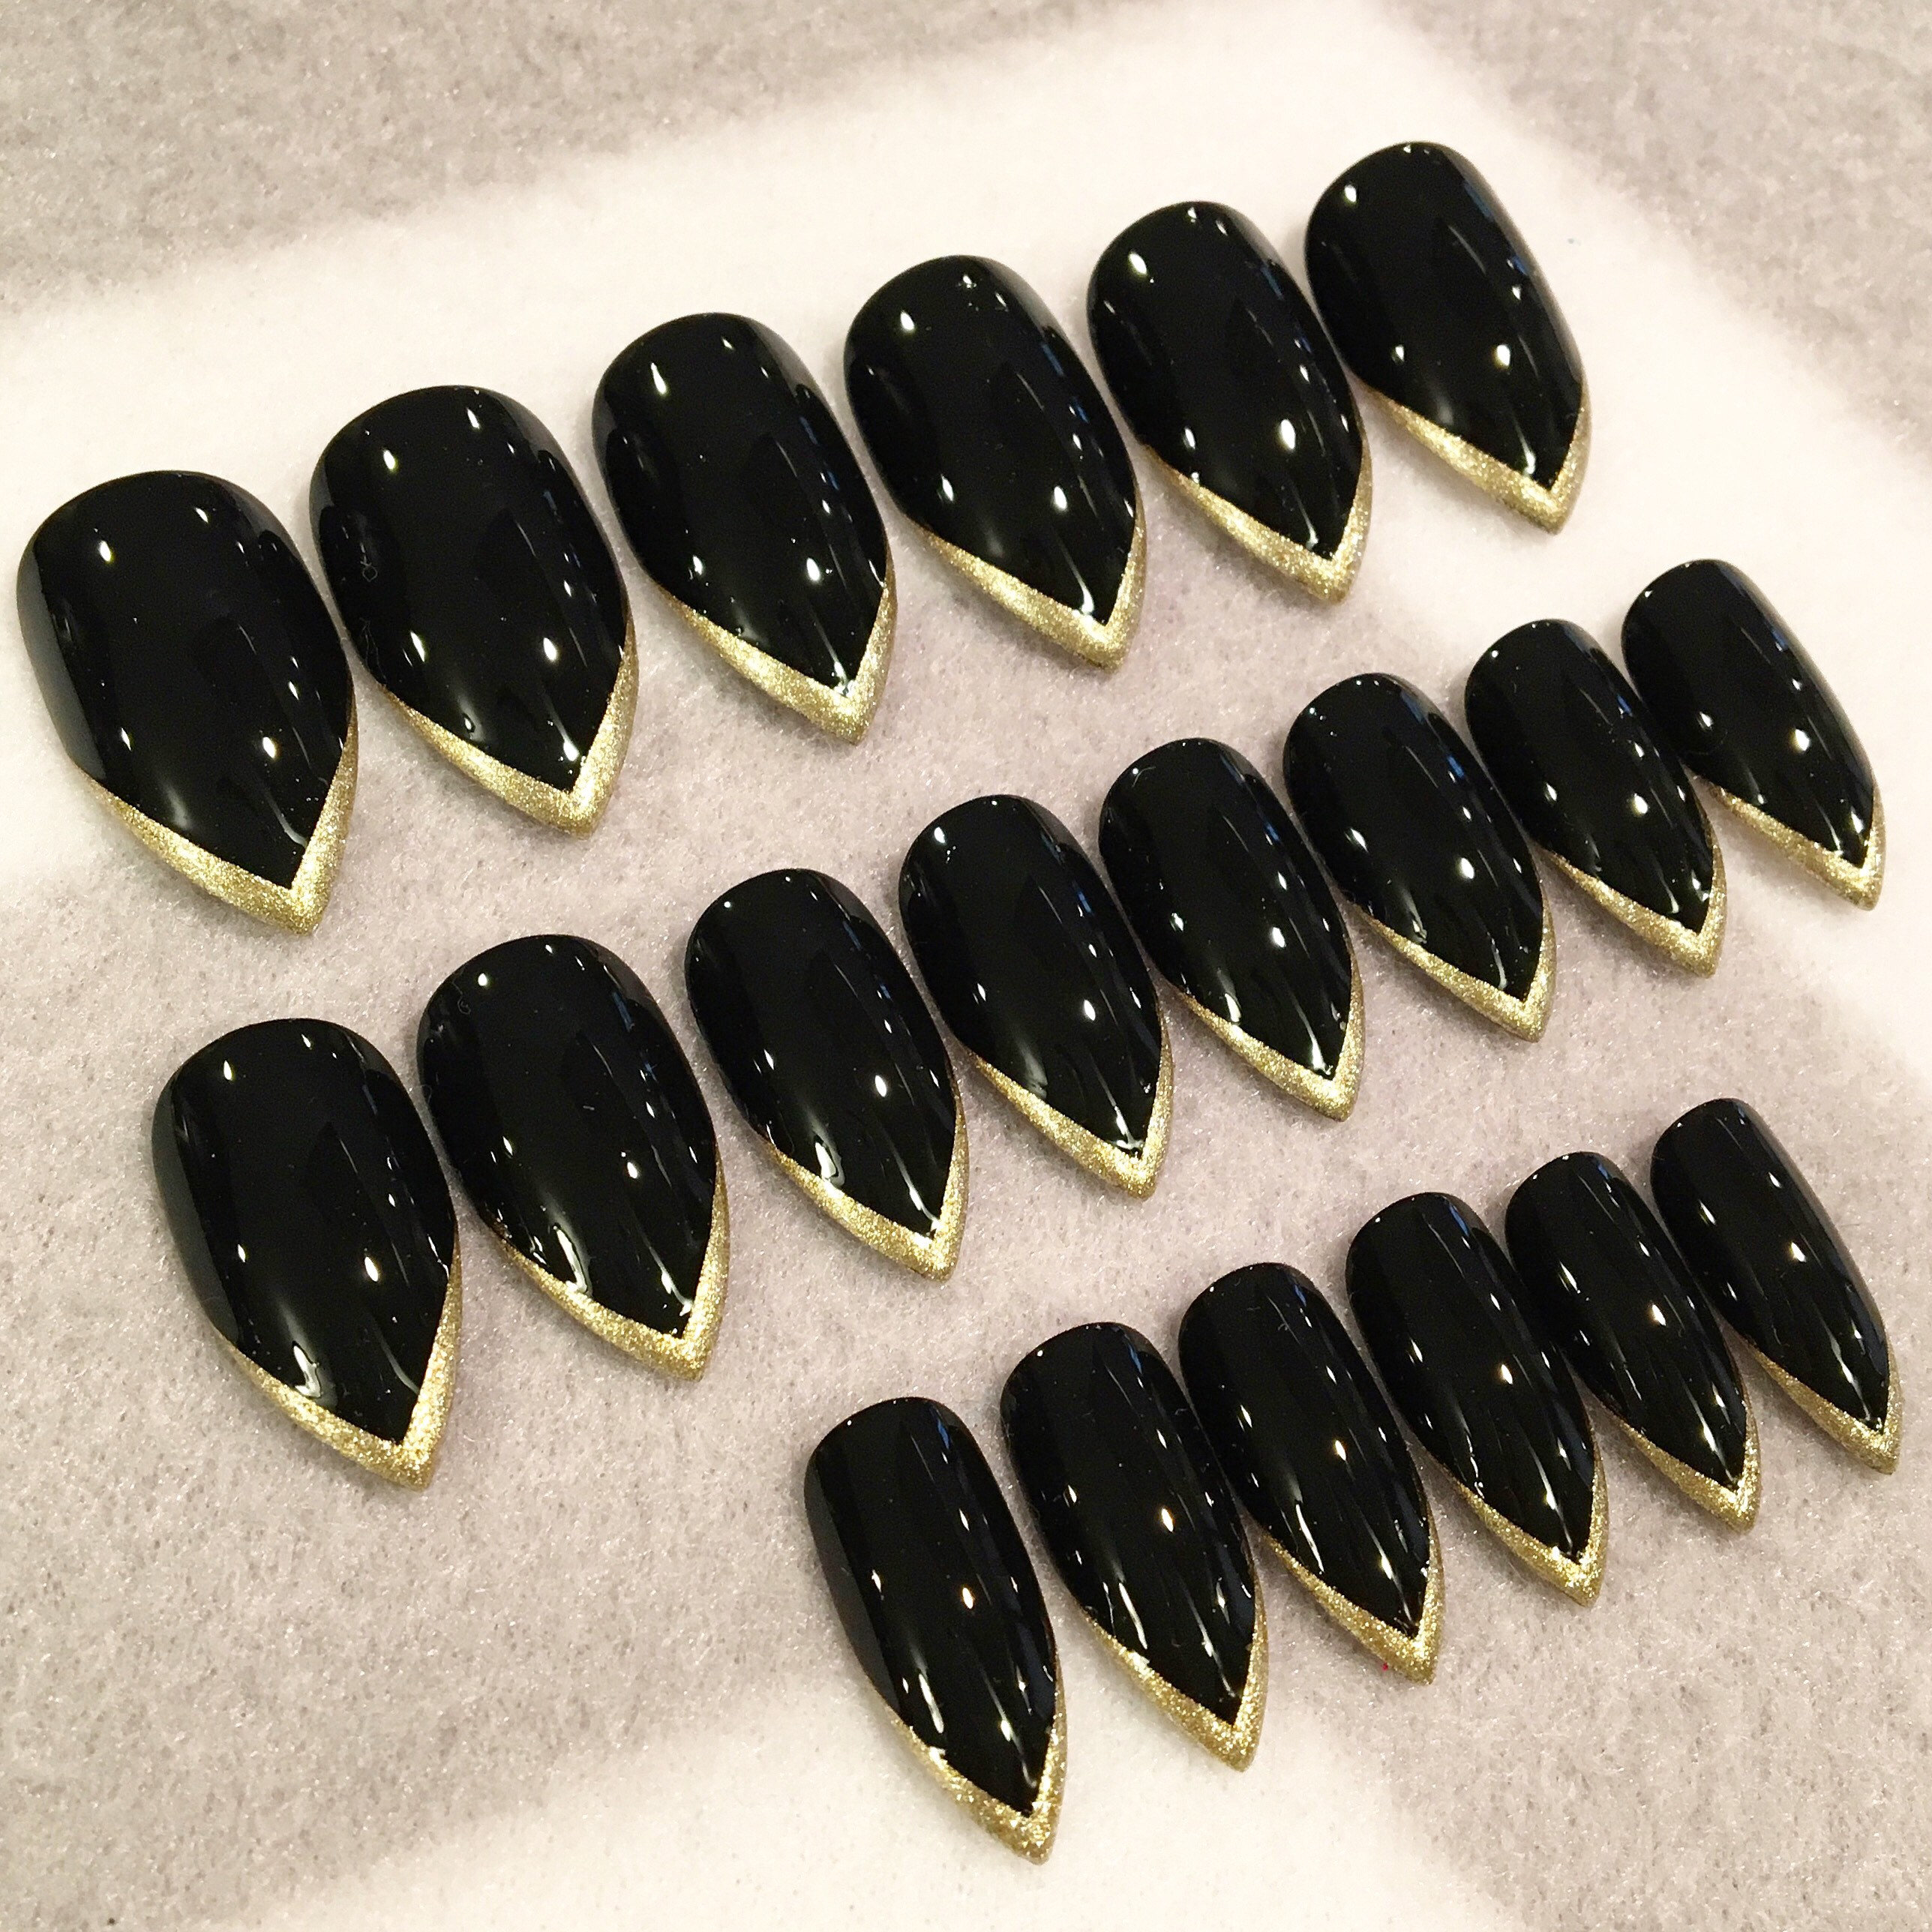 Black and Gold Stiletto Fake Nails Faux Nails Gold Tips - Etsy